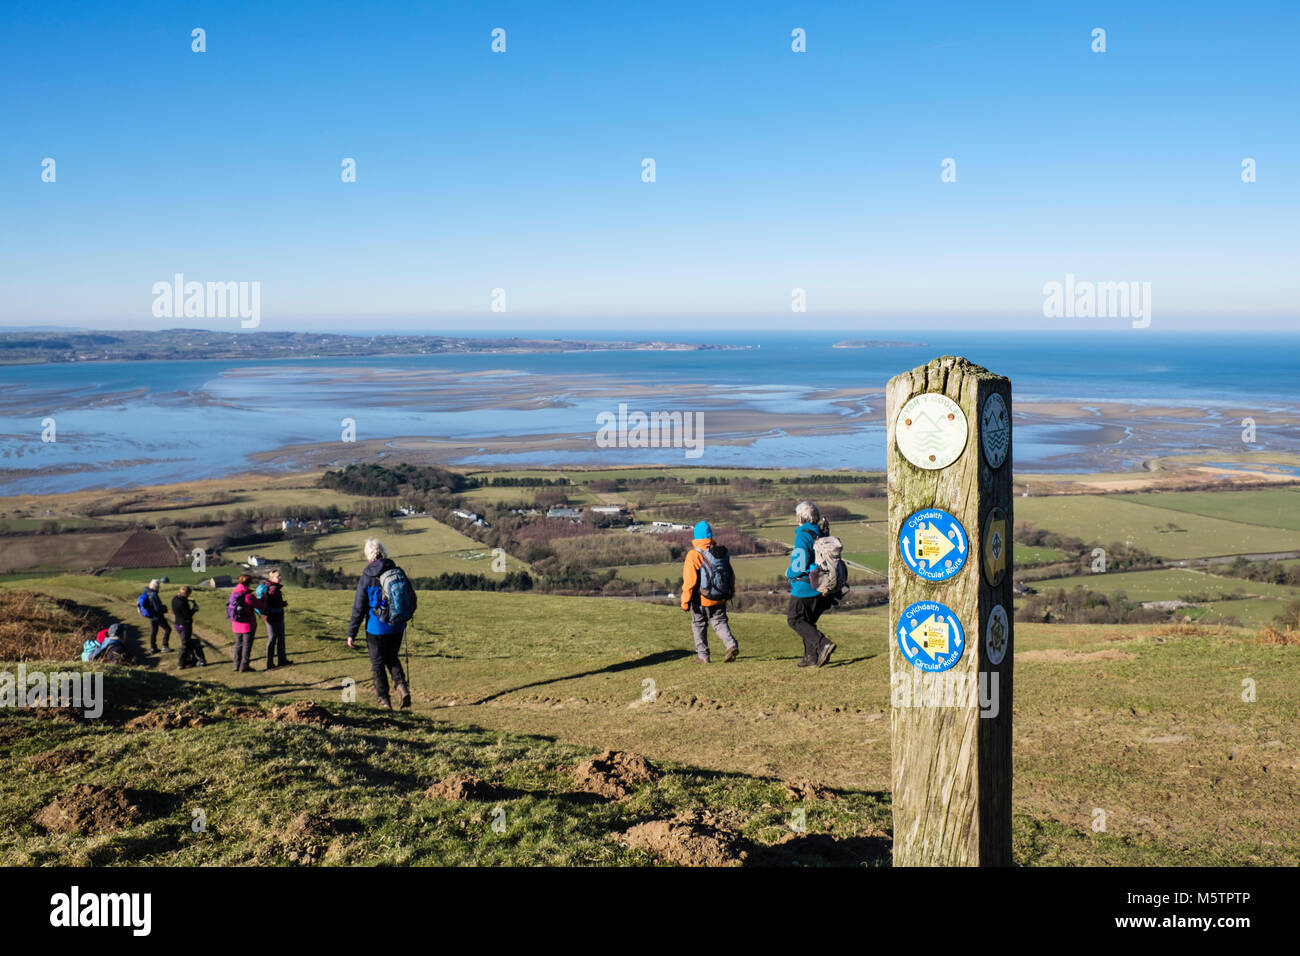 Circular Route footpath sign on North Wales Path with hikers hiking and view to Menai Strait on coast. Abergwyngregyn, Gwynedd, Wales, UK, Britain Stock Photo